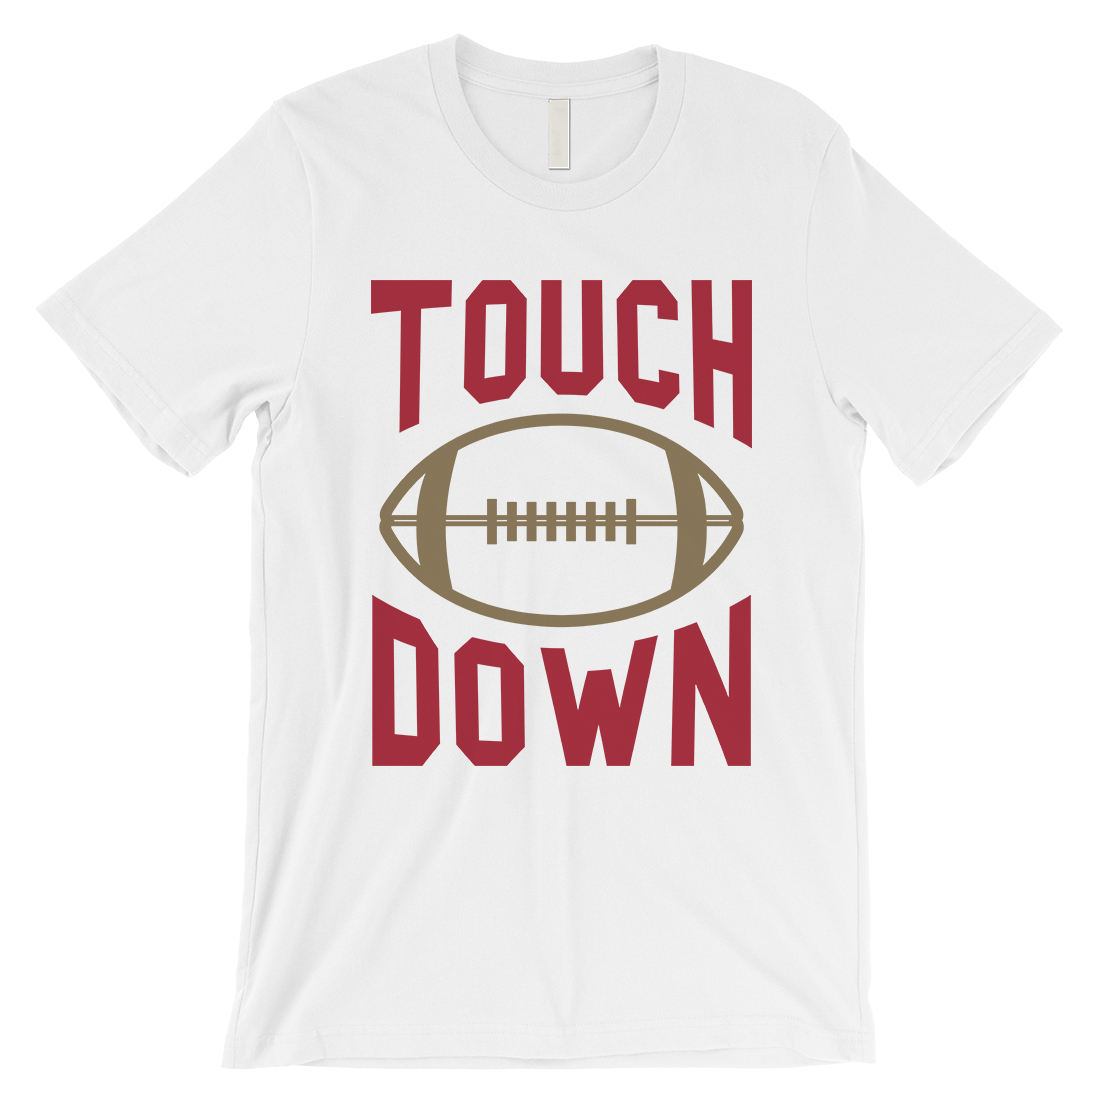 TOUCHDOWN San Francisco T-Shirt Mens Funny Game Day White Tee Shirt - image 1 of 4